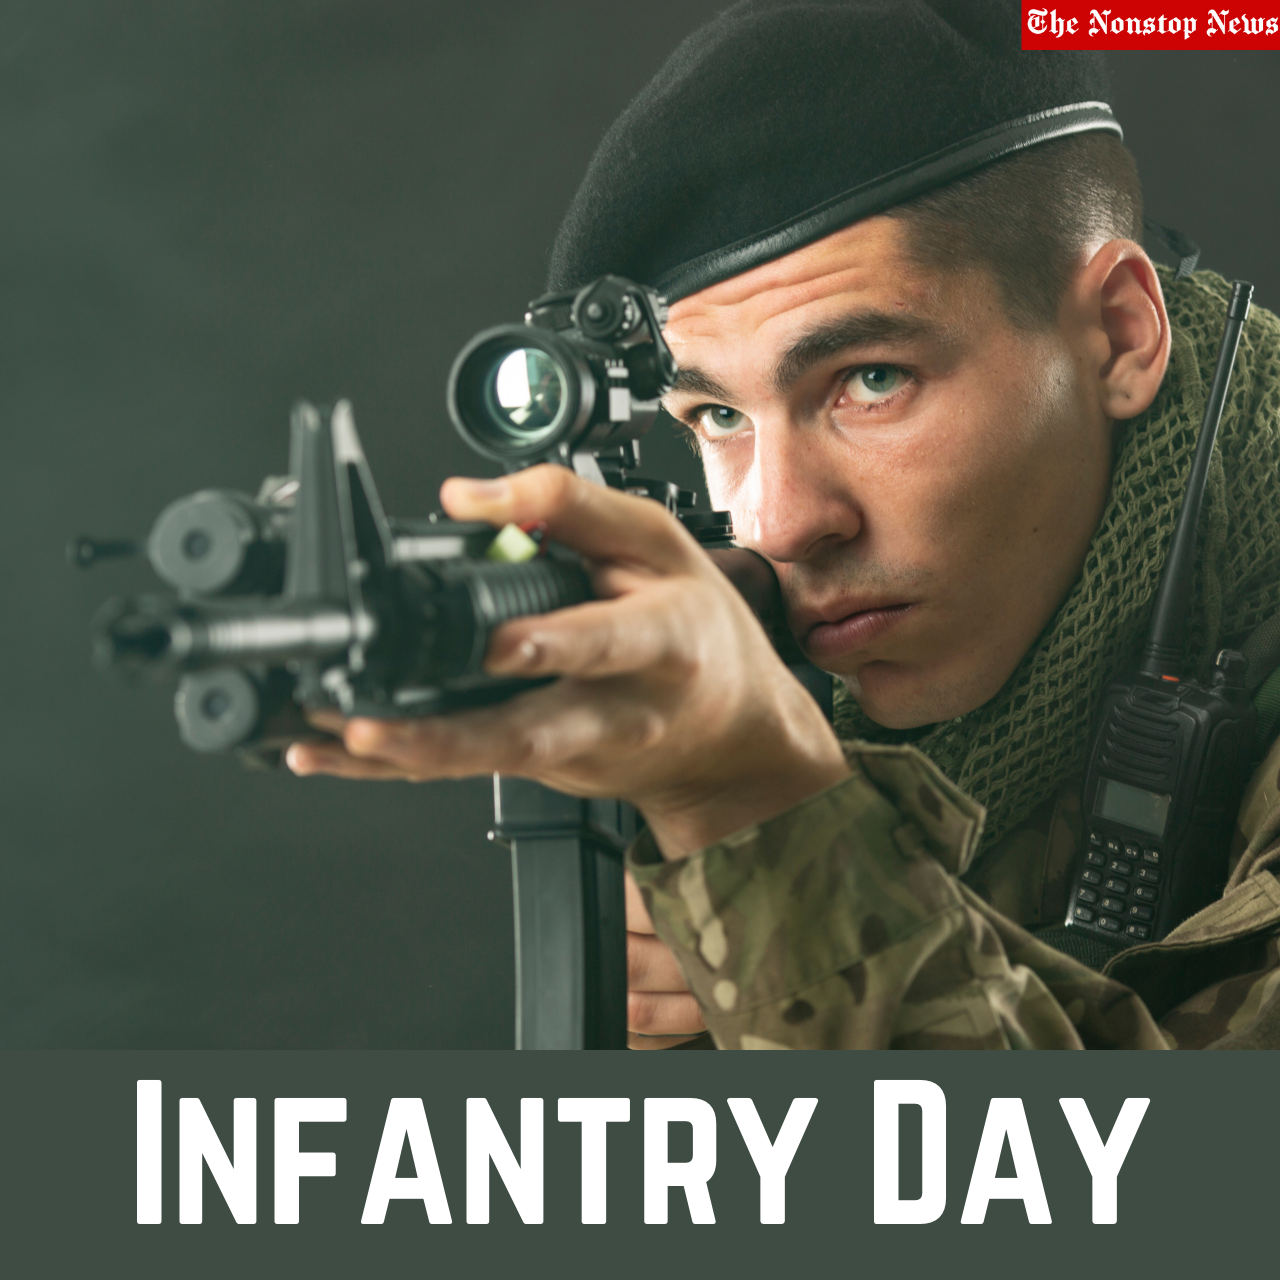 Infantry Day 2021 Quotes, Wishes, HD Images, Messages, and Greetings to Share